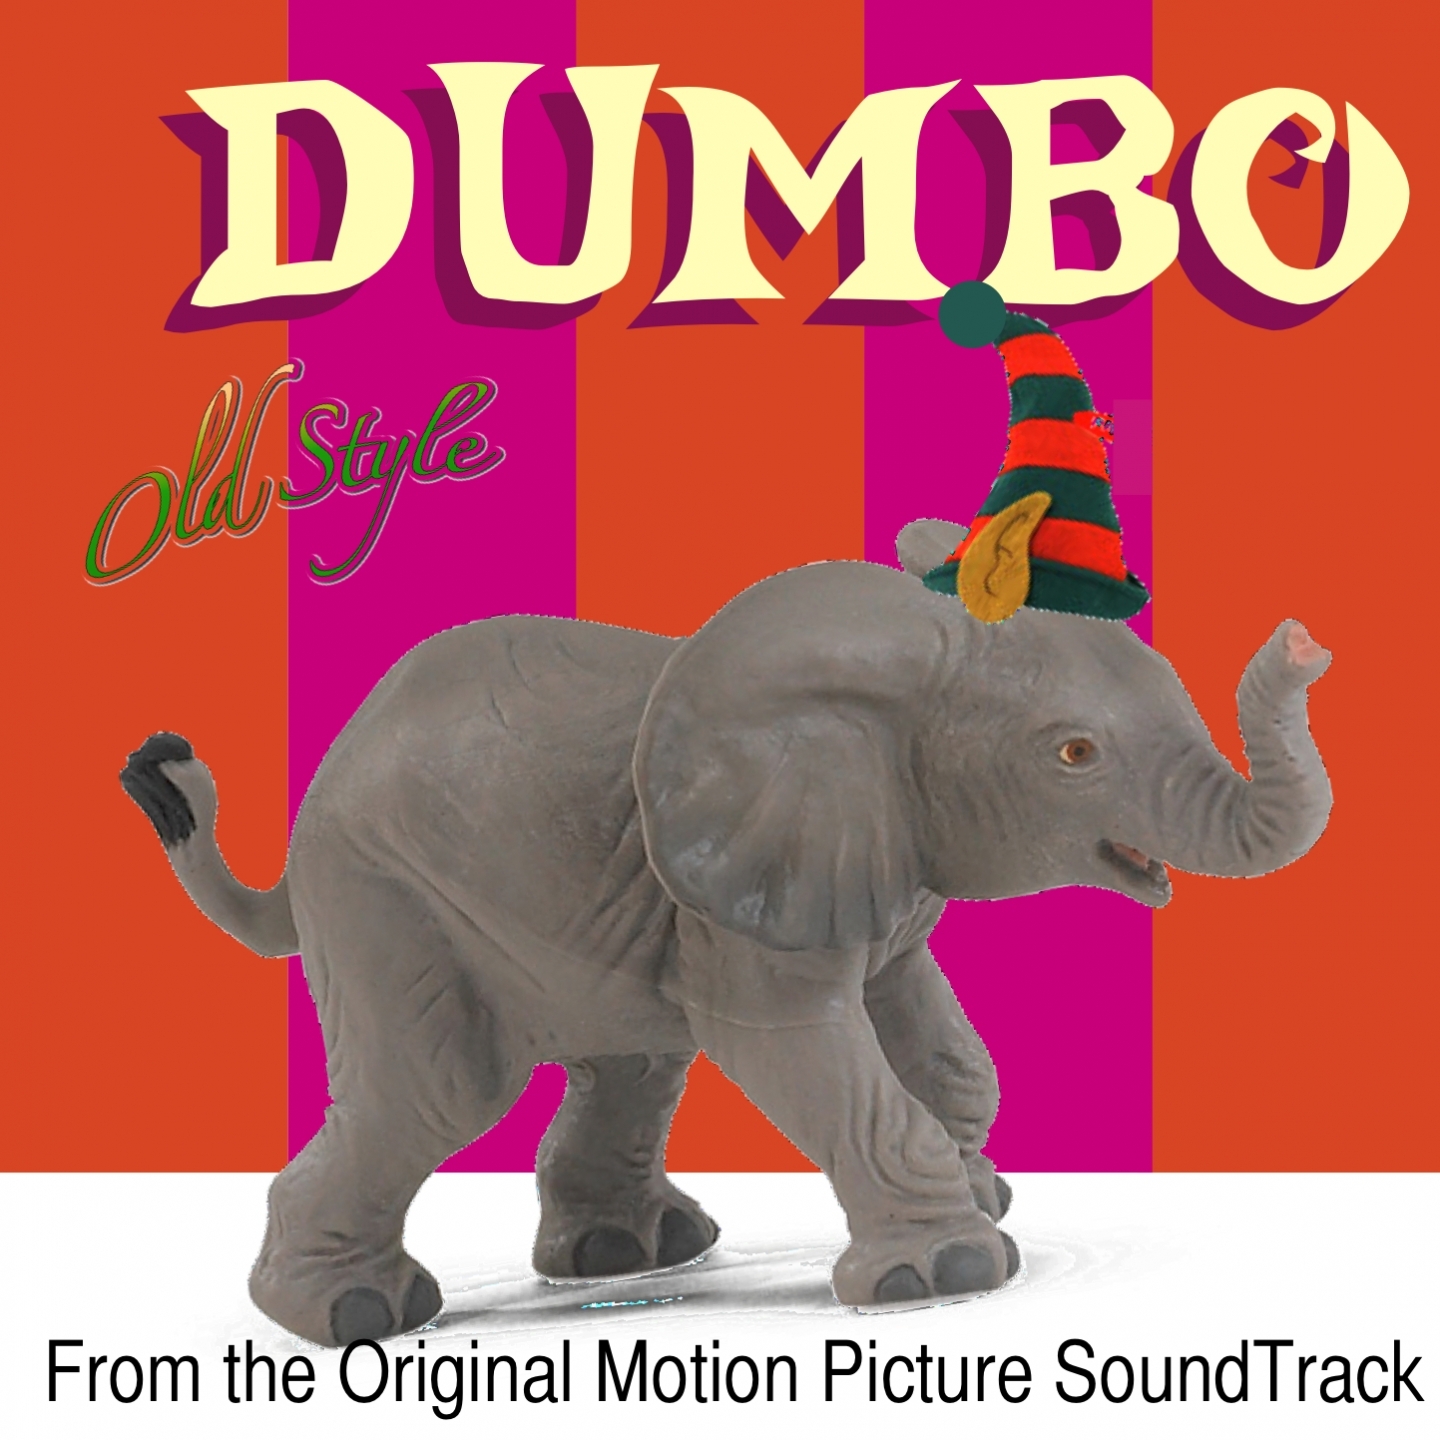 When I See an Elephant Fly (Crow Quintet & Orchestra), Dumbo's Triupmph, Finale (Instrumental)